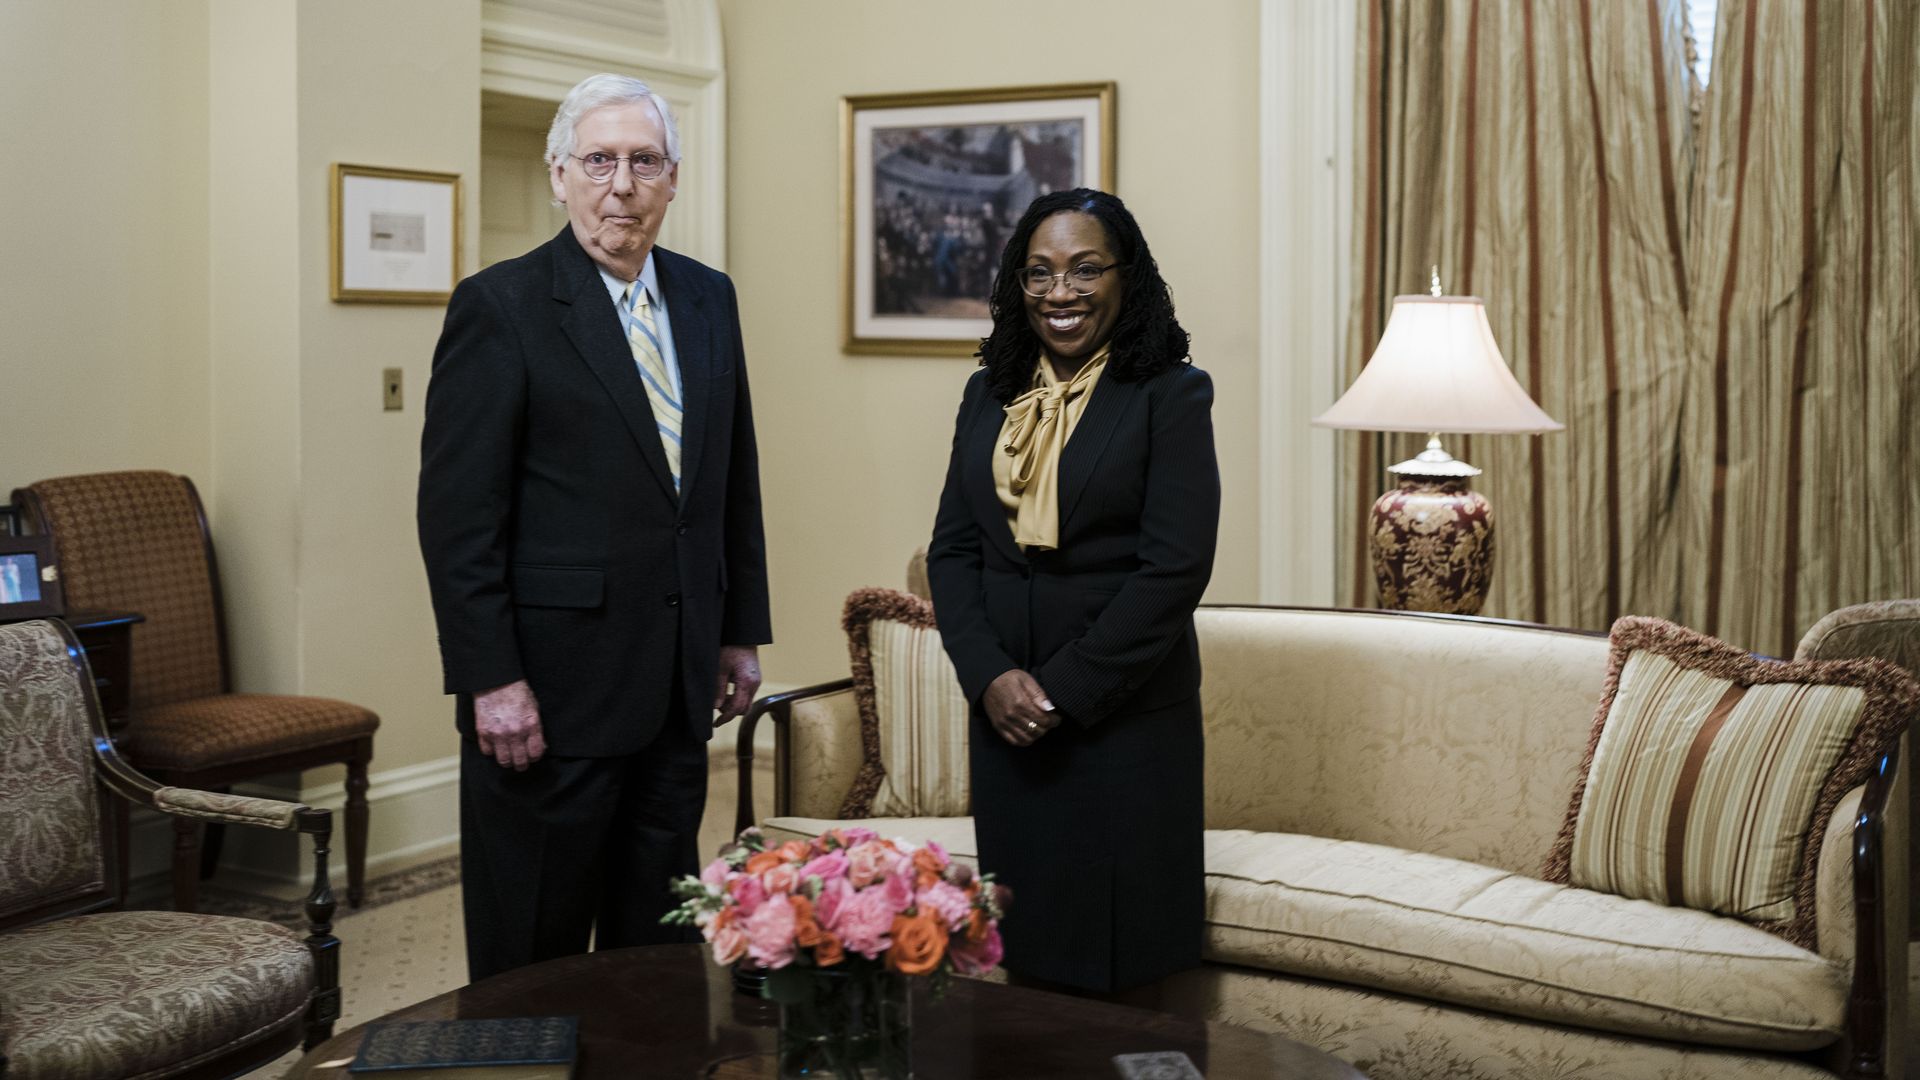 Judge Ketanji Brown Jackson is seen with Senate Minority Leader Mitch McConnell as she made her Hill rounds.